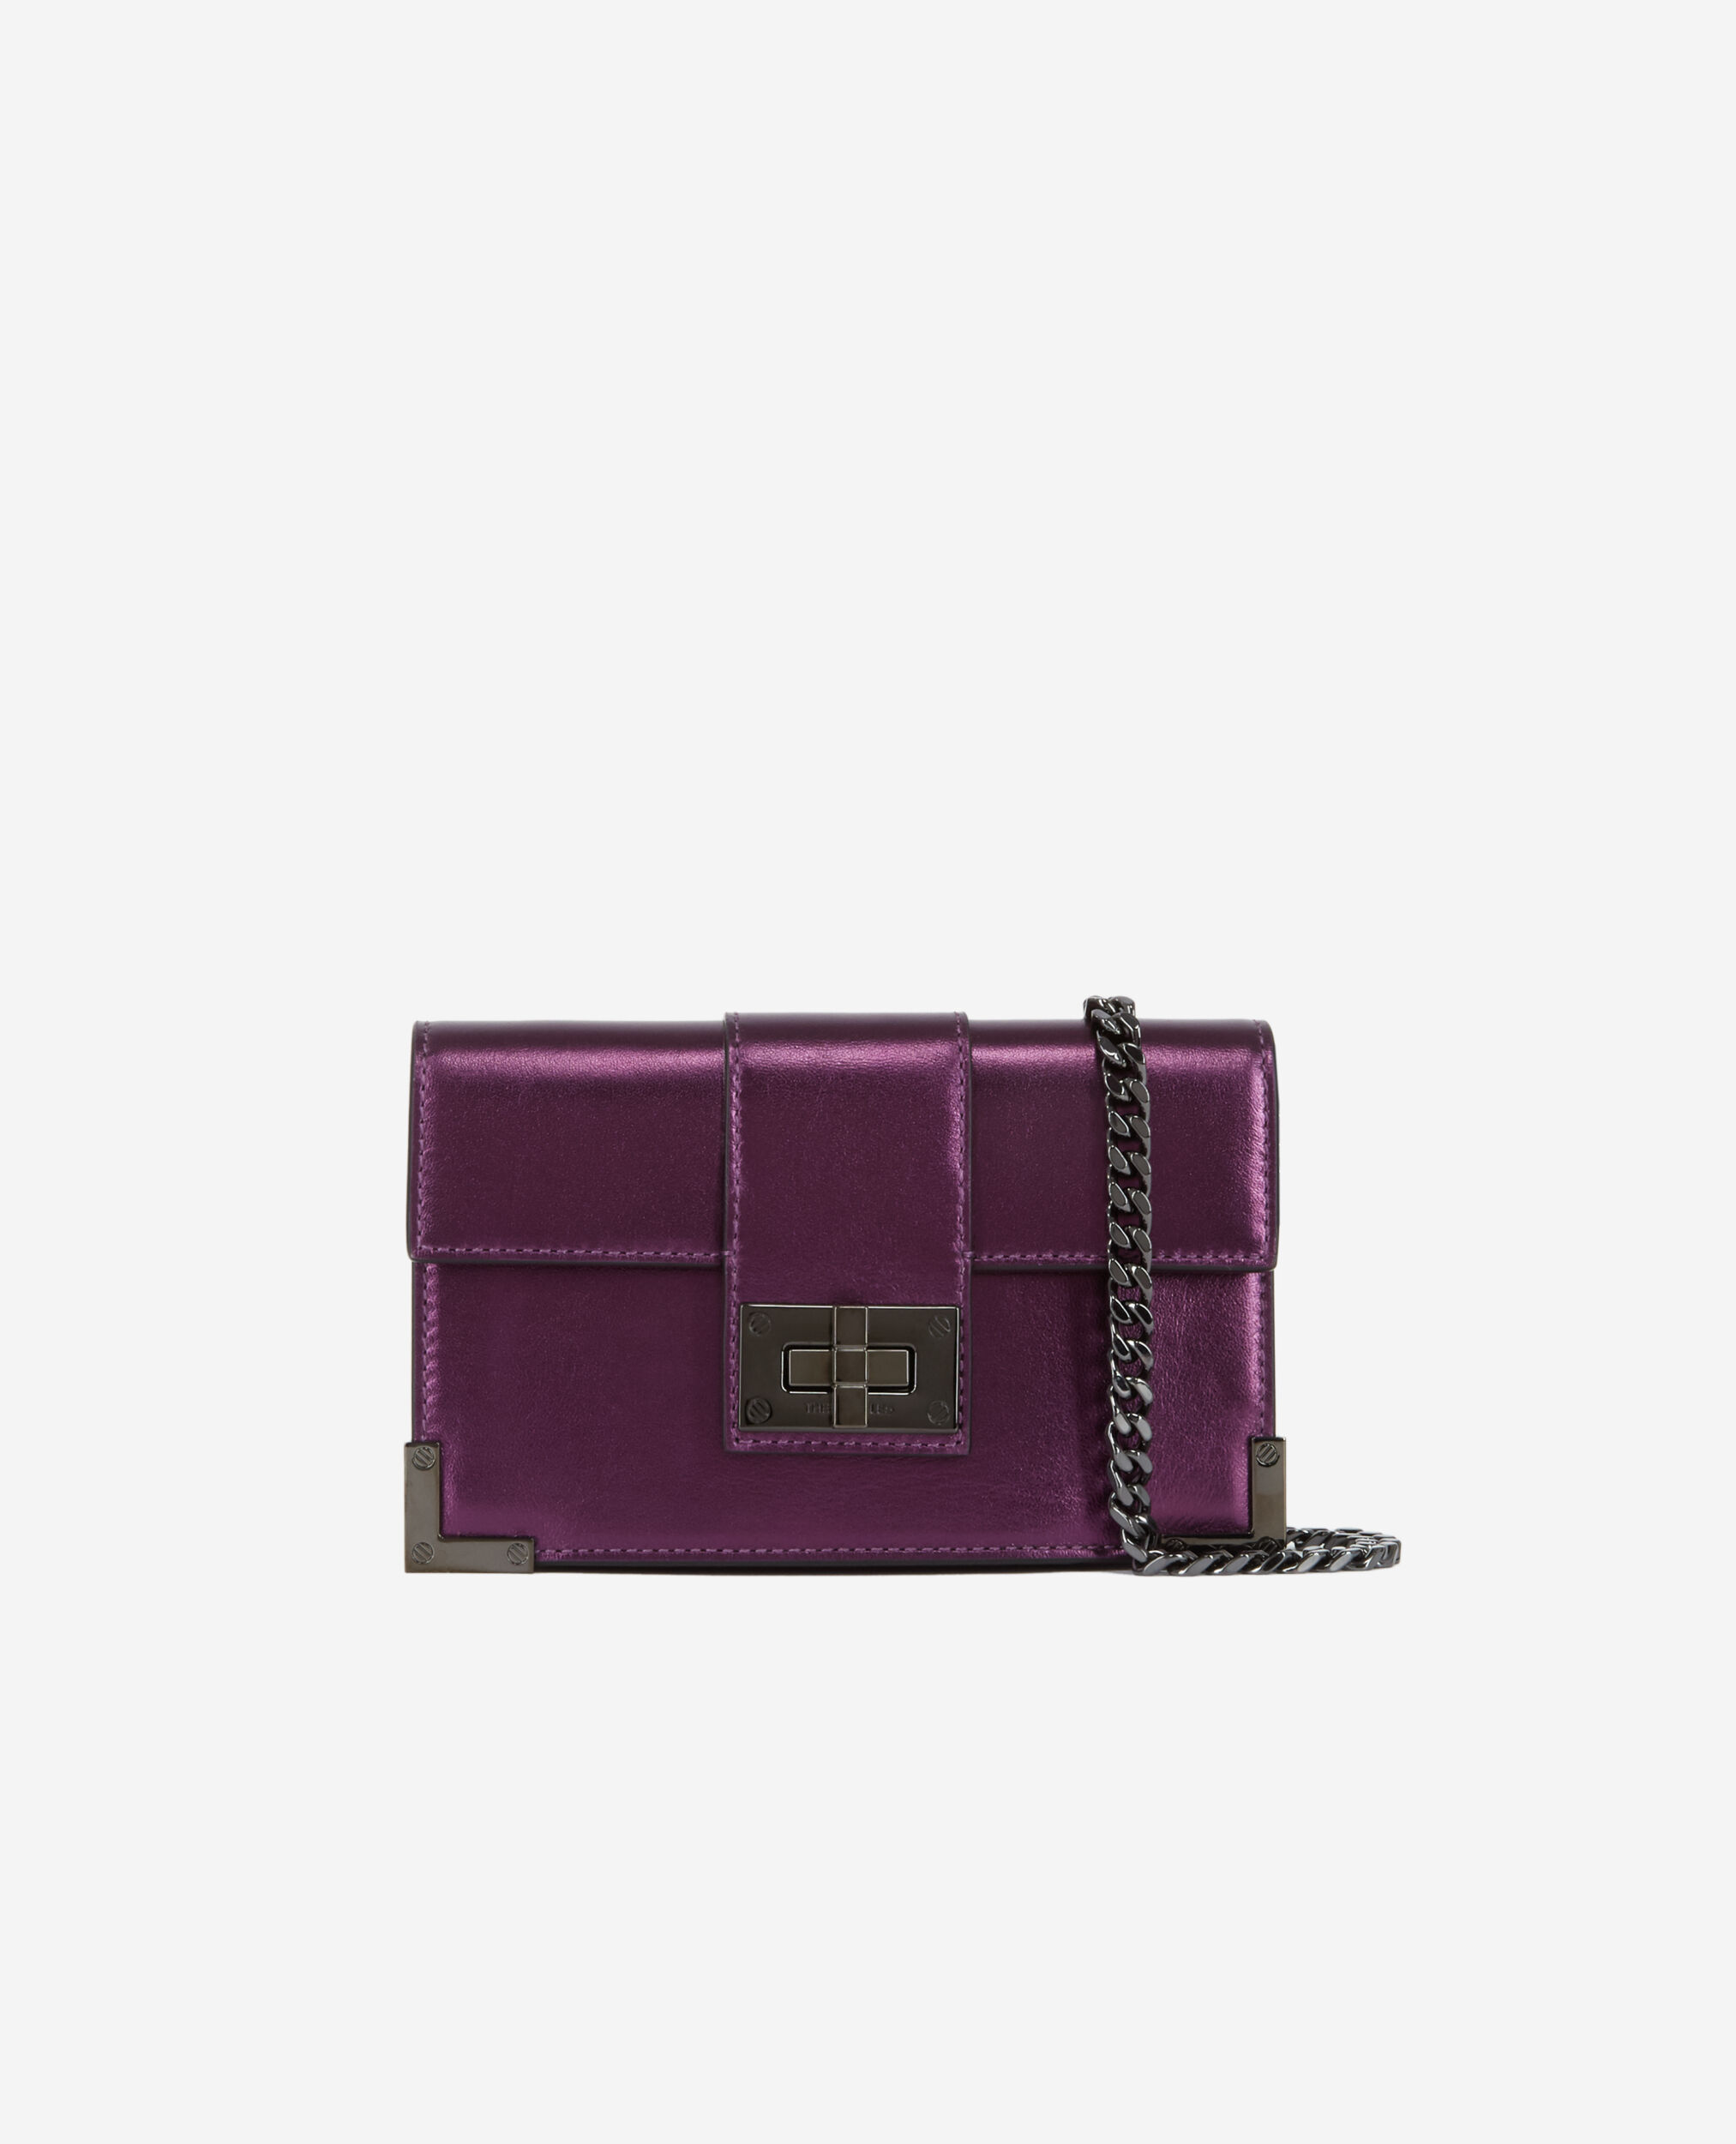 The small Emily clutch bag in purple leather, an iconic piece from our  collection of The Kooples bags. Available now on our website!